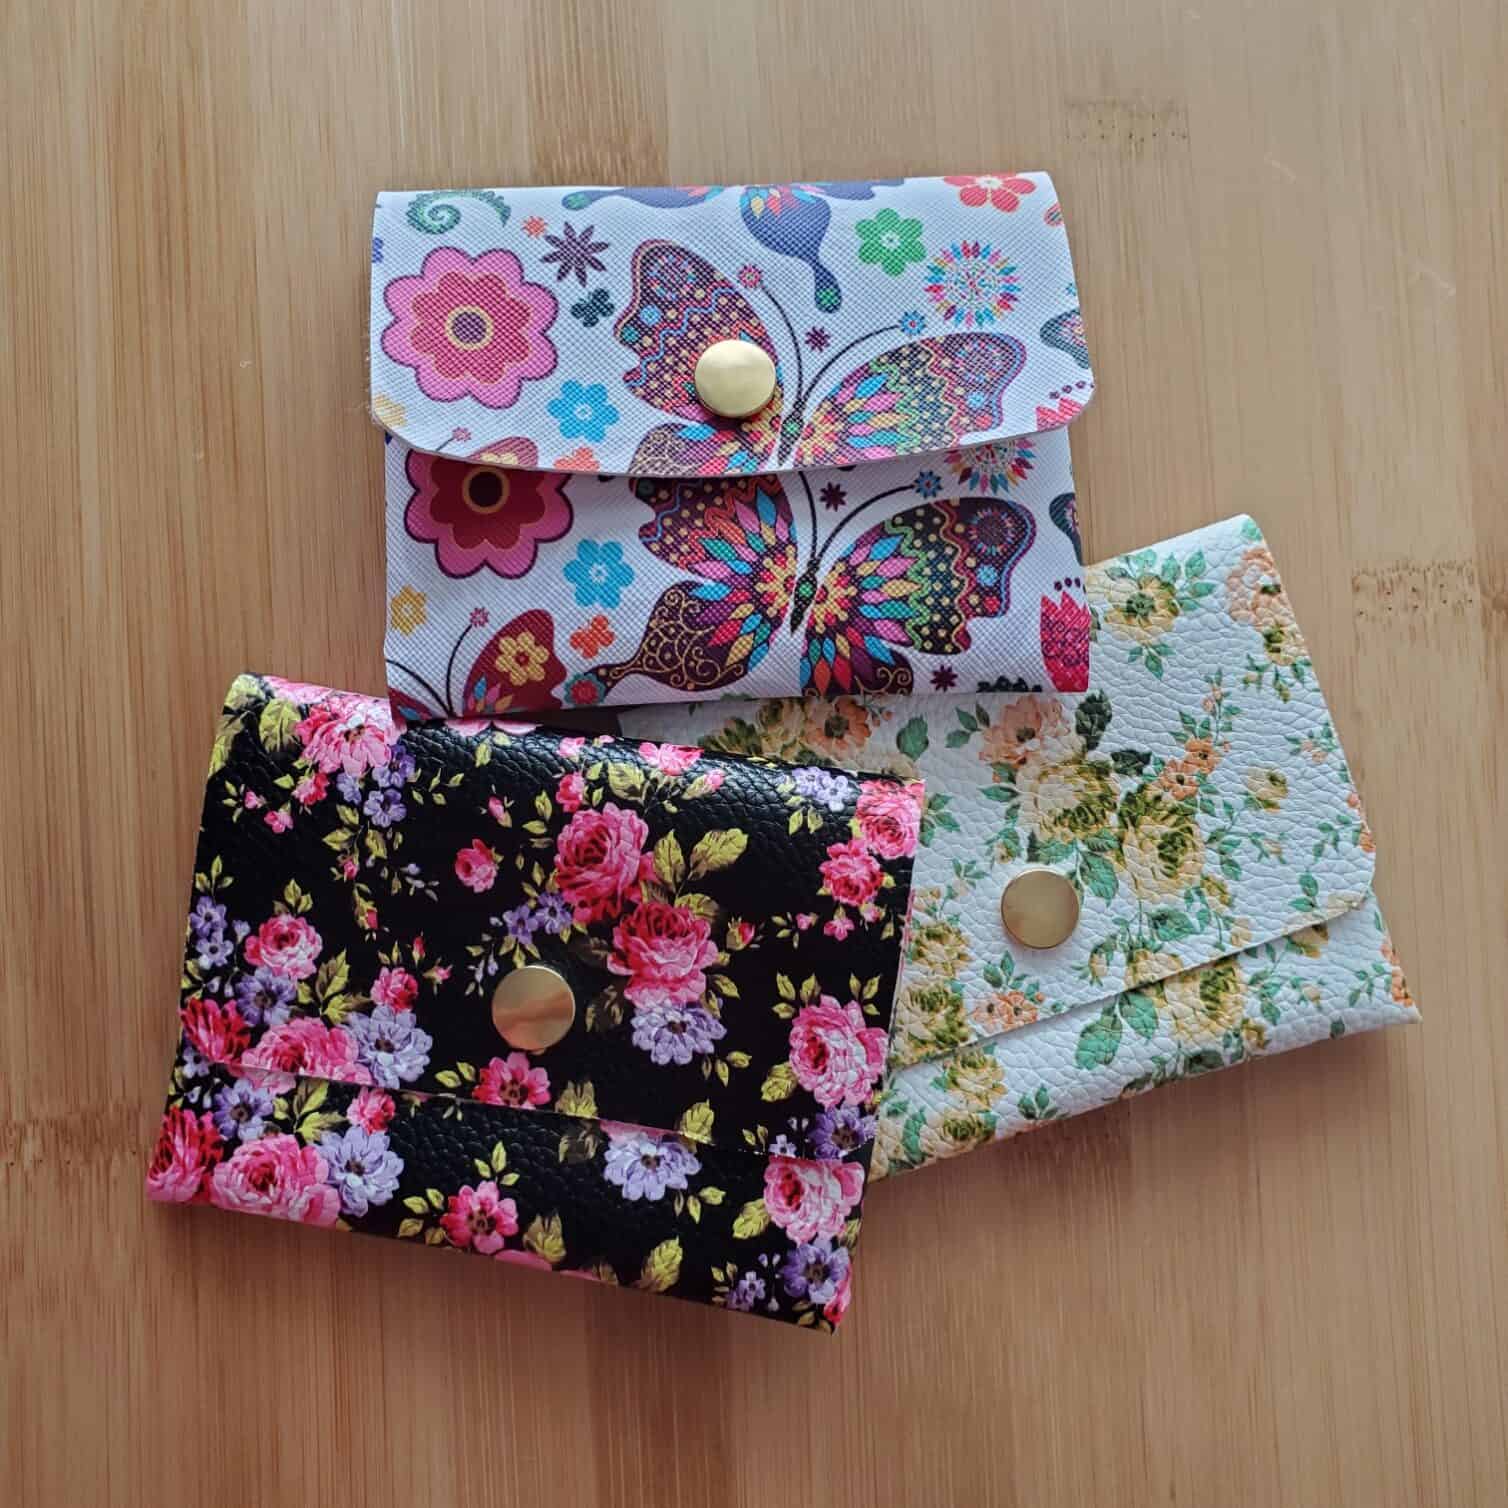 2020 DIY leather craft Mini bag Small coin purse sewing pattern pvc template  - AliExpress